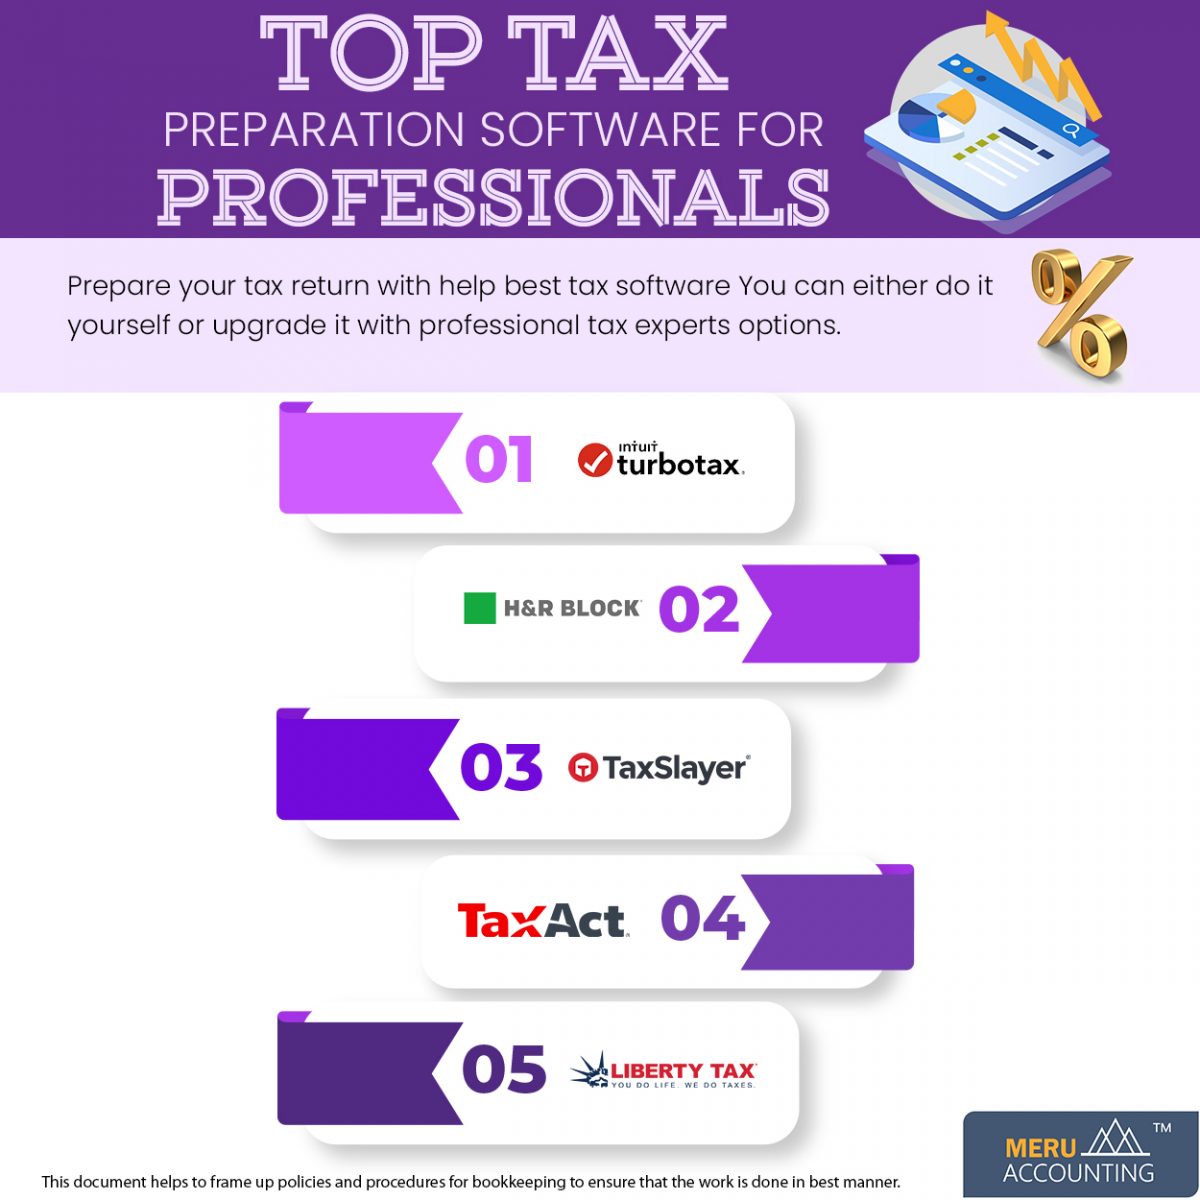  Top Tax Preparation Software 